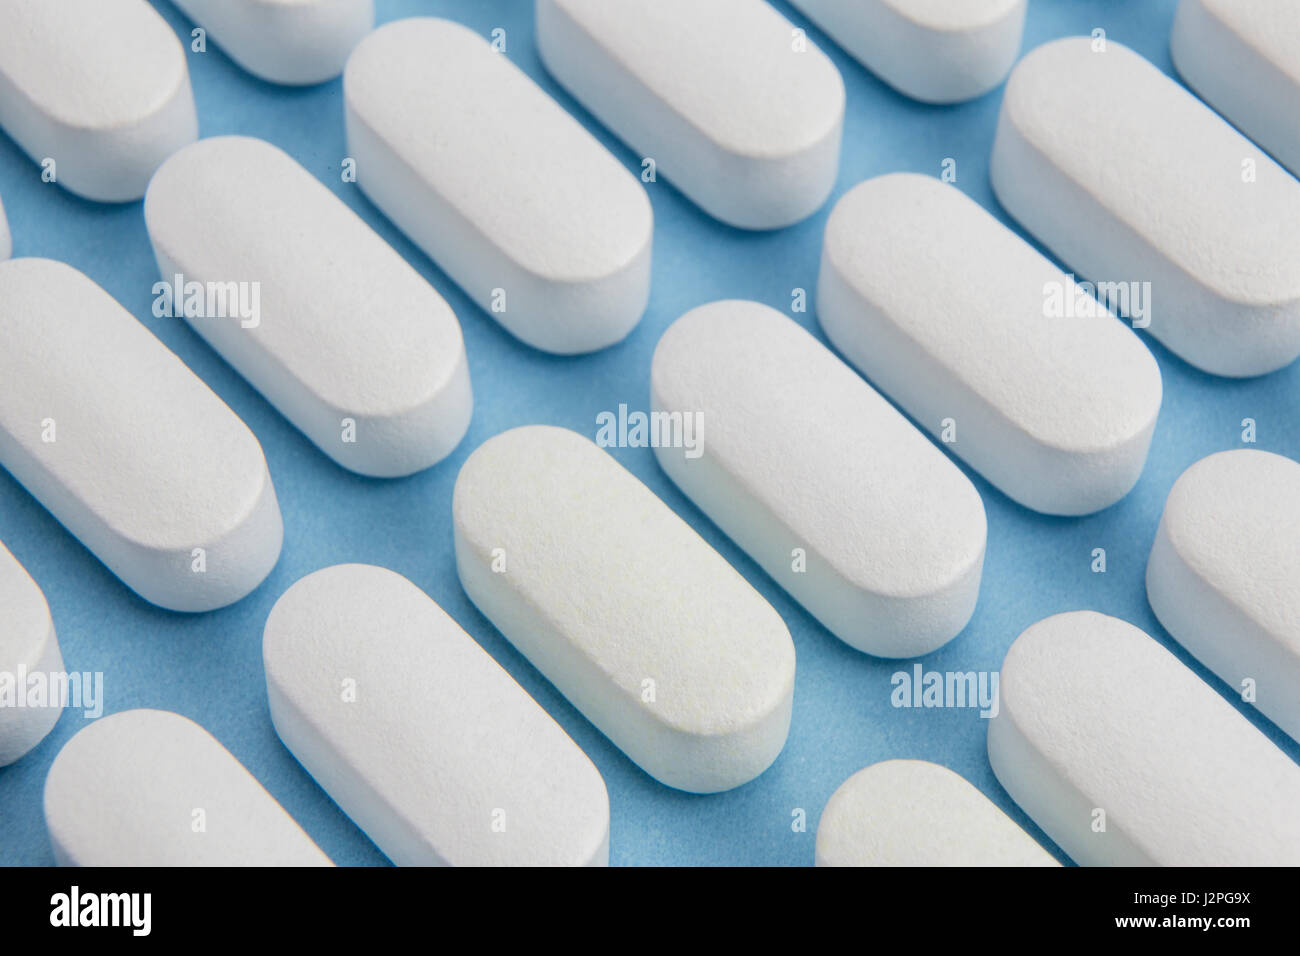 Some pills aligned isolated on blue background Stock Photo